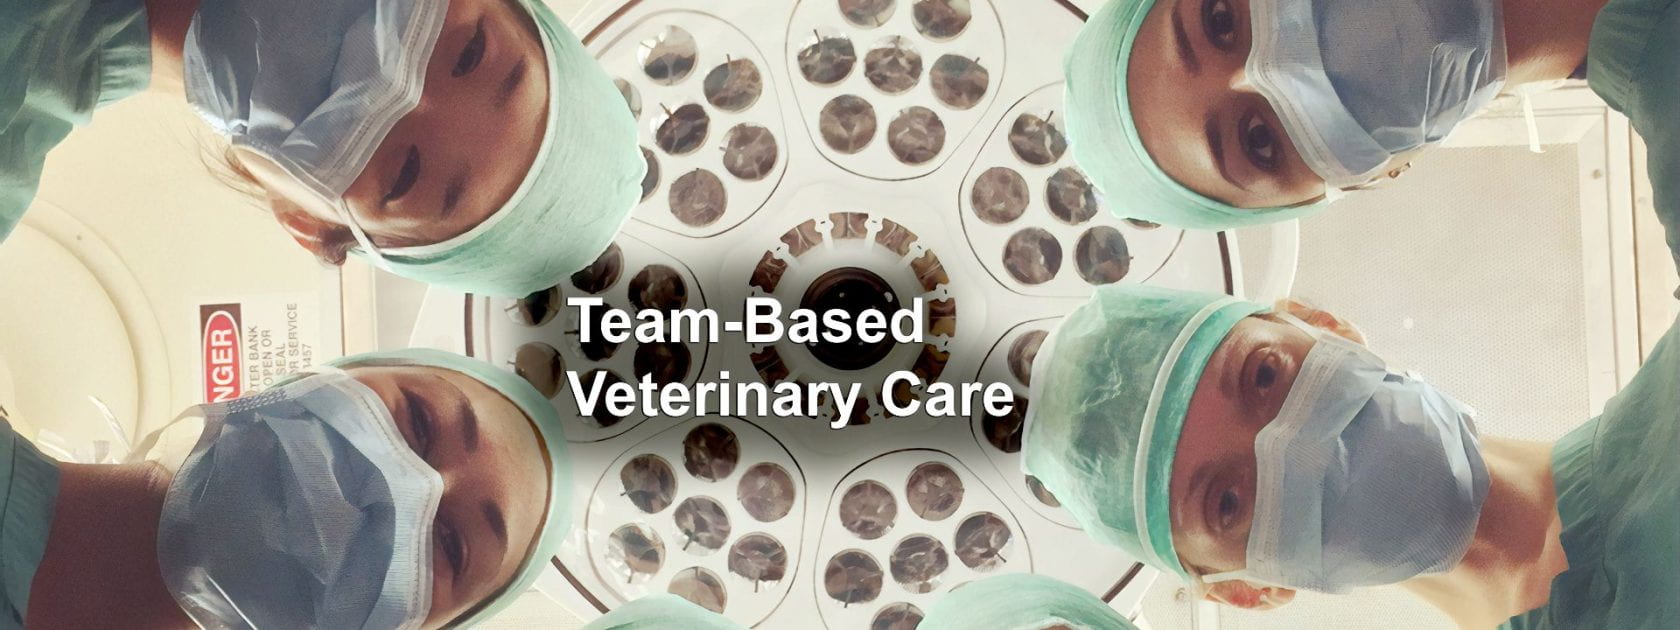 Veterinary team in a circle, wearing surgical scrubs and masks, looking down at the patient, from the point of view of the patient.